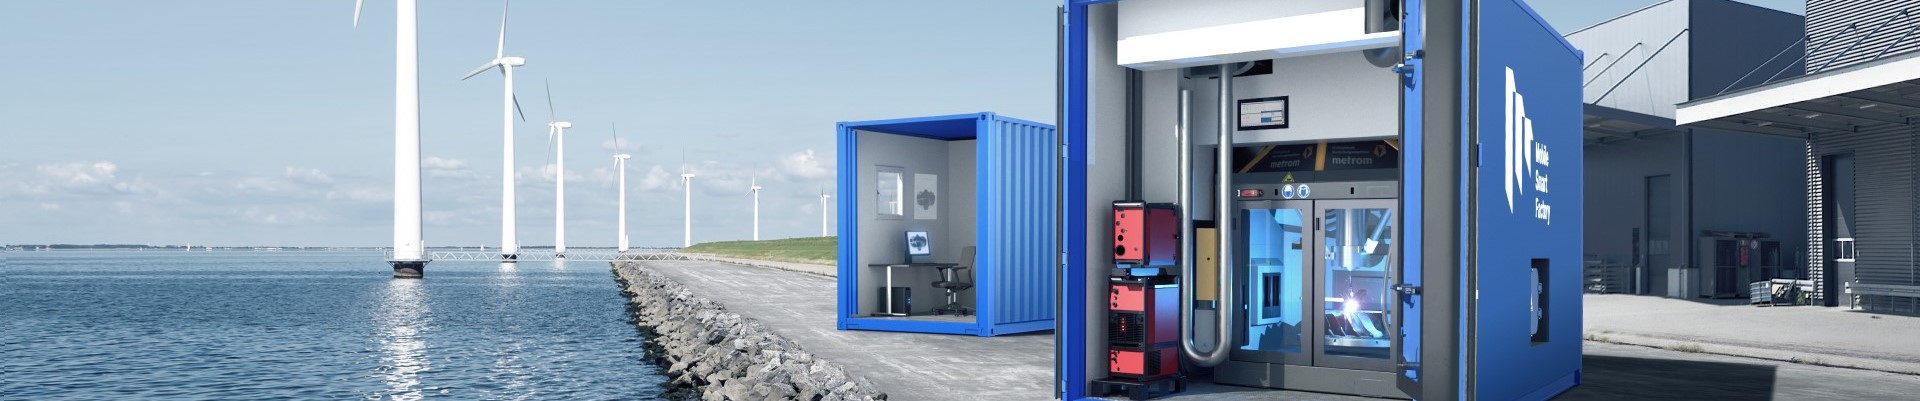 The Mobile Smart Factory increases flexibility and agility to a flexible provision of parts